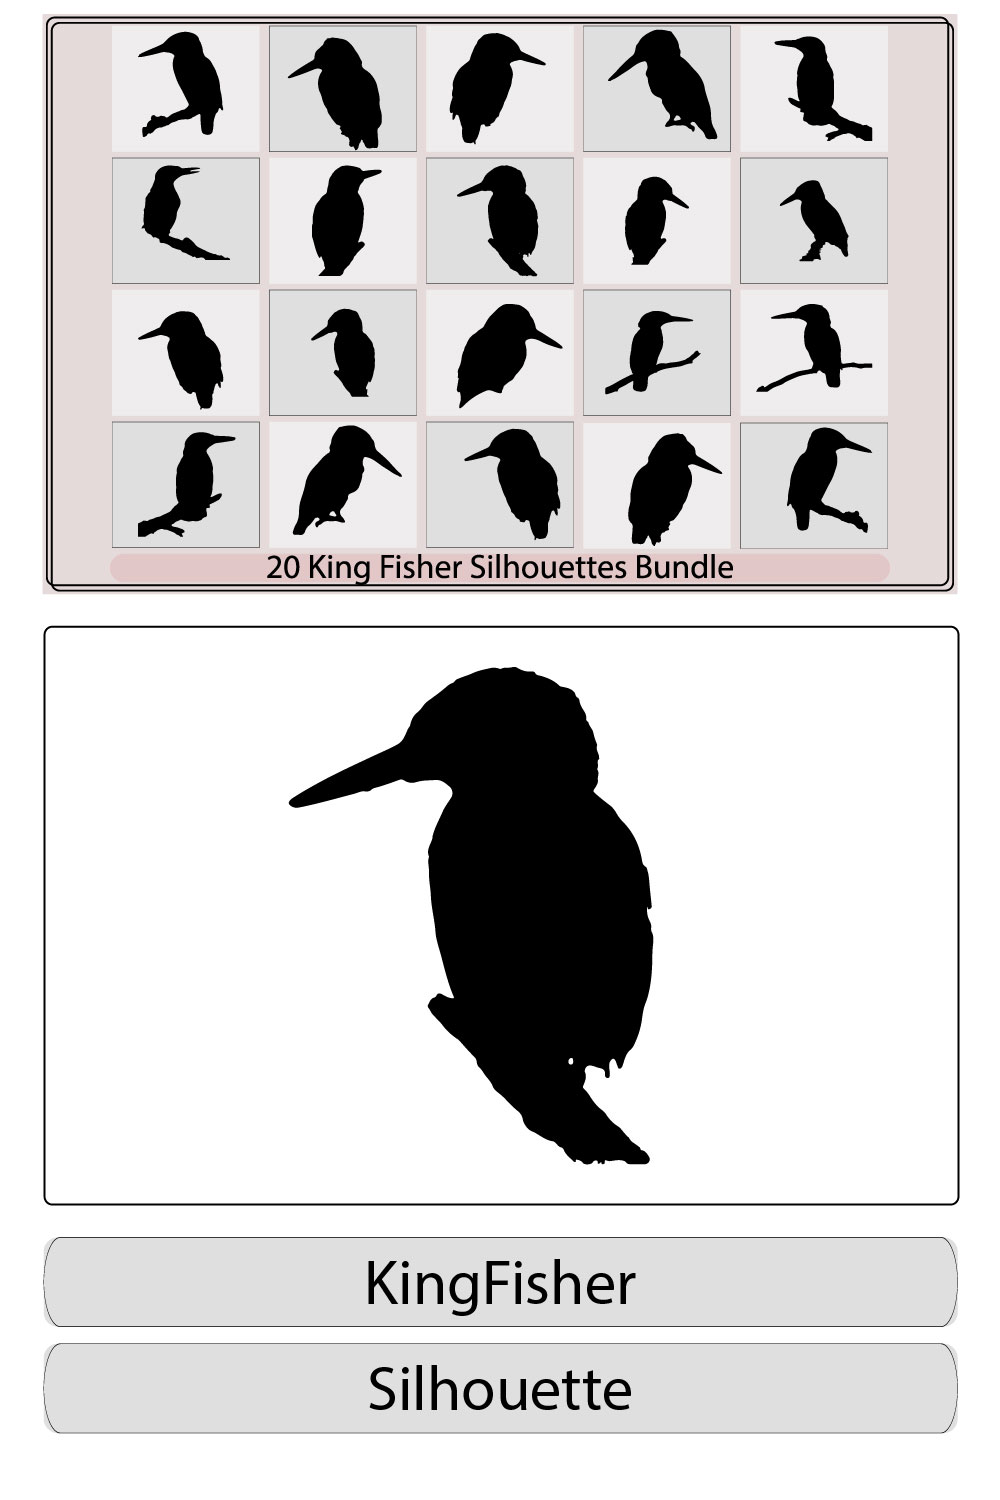 kingfisher silhouette,Flying kingfisher logo,silhouette of a flock of kingfishers,kingfishers on branch silhouette pinterest preview image.